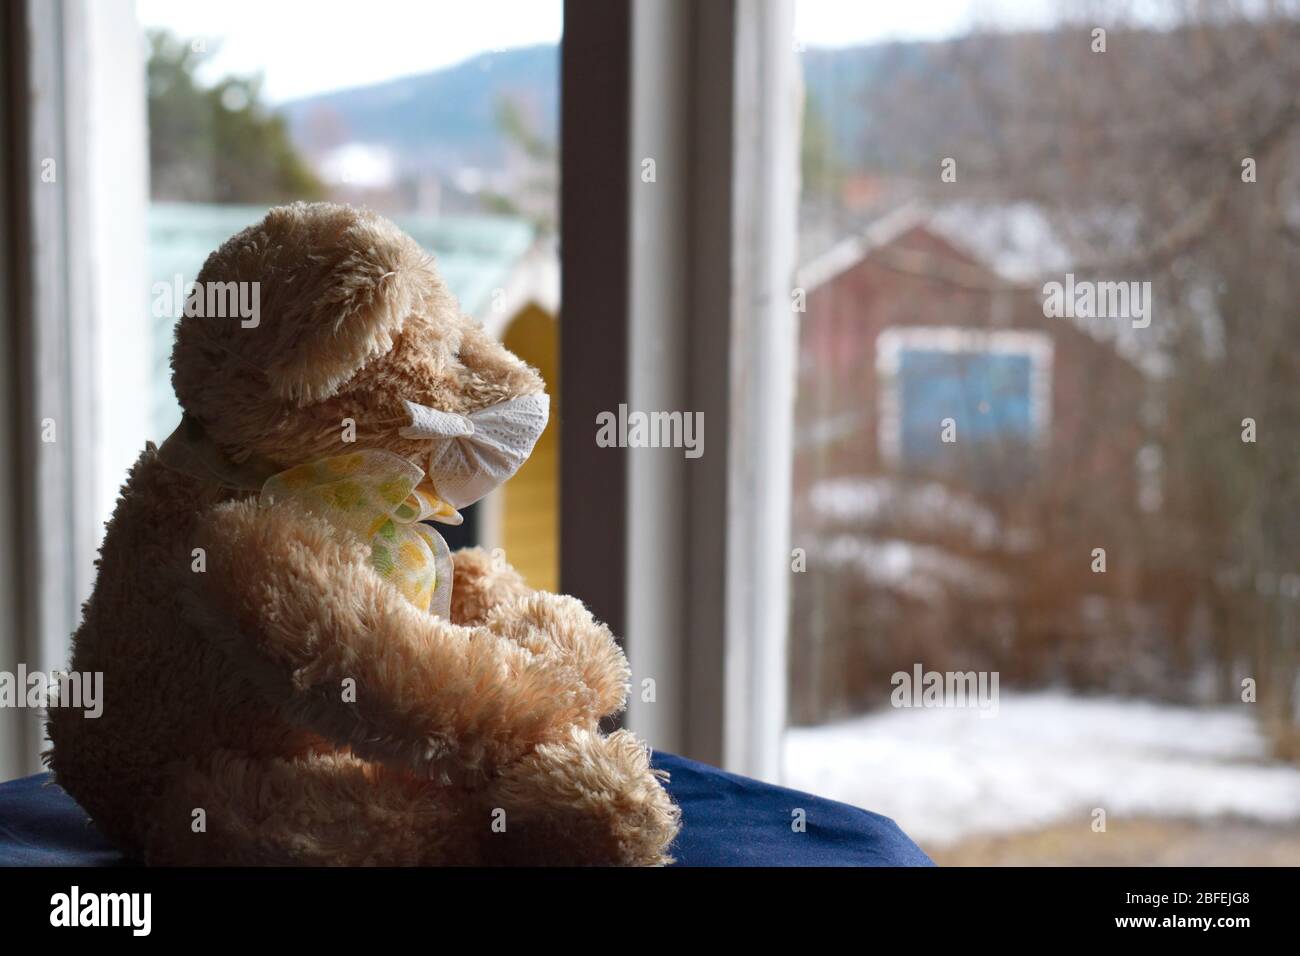 A teddy bear wearing a face mask is sitting in front of a window, looking out onto a snow-covered garden in Sweden. Stock Photo